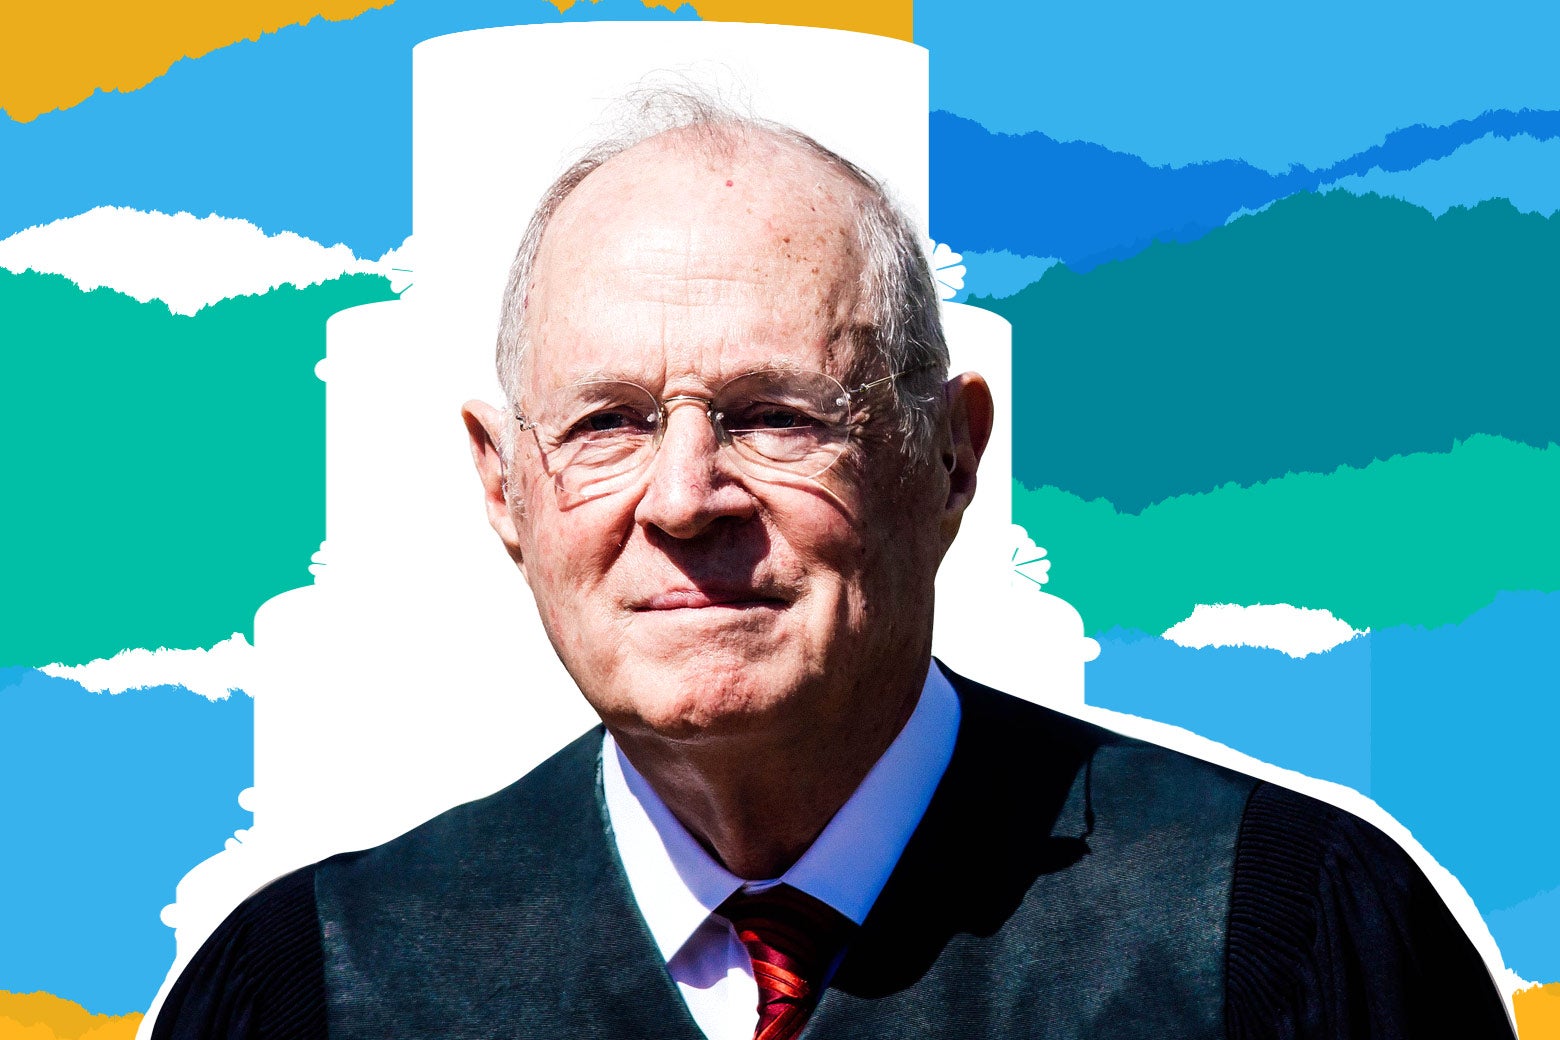 Photo illustration: Supreme Court Justice Anthony Kennedy against a blue, green, yellow, and white background.